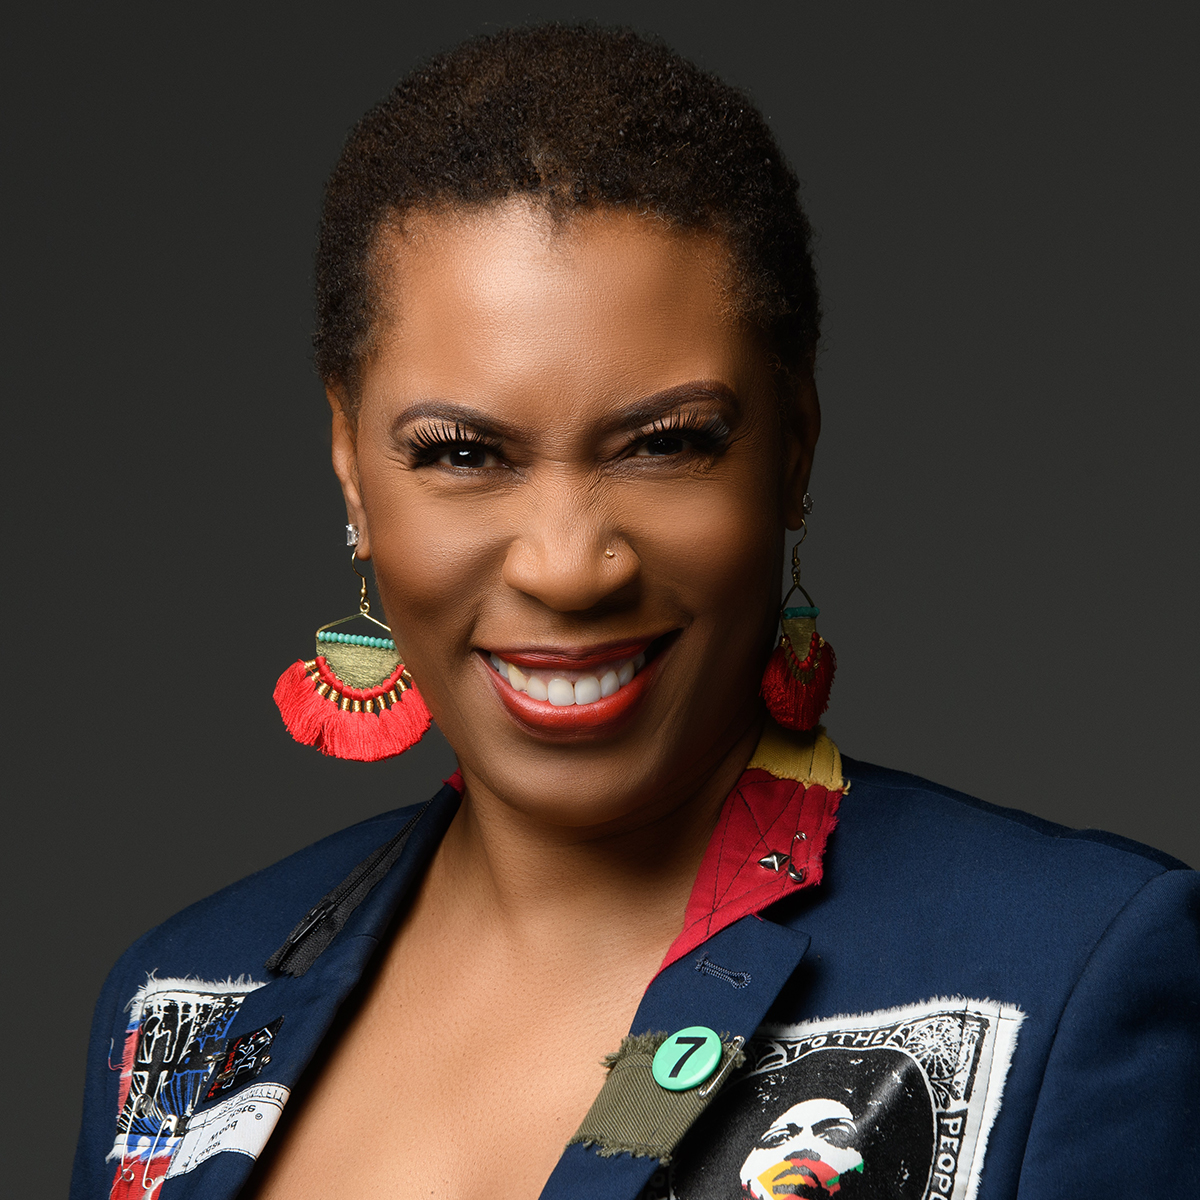 Jenée Johnson color portrait. Jenée is a Black woman with short hair, bright red lips, and brightly colored, dangling earrings. She is wearing a blue blazer with patches, textures, different fabrics across it.